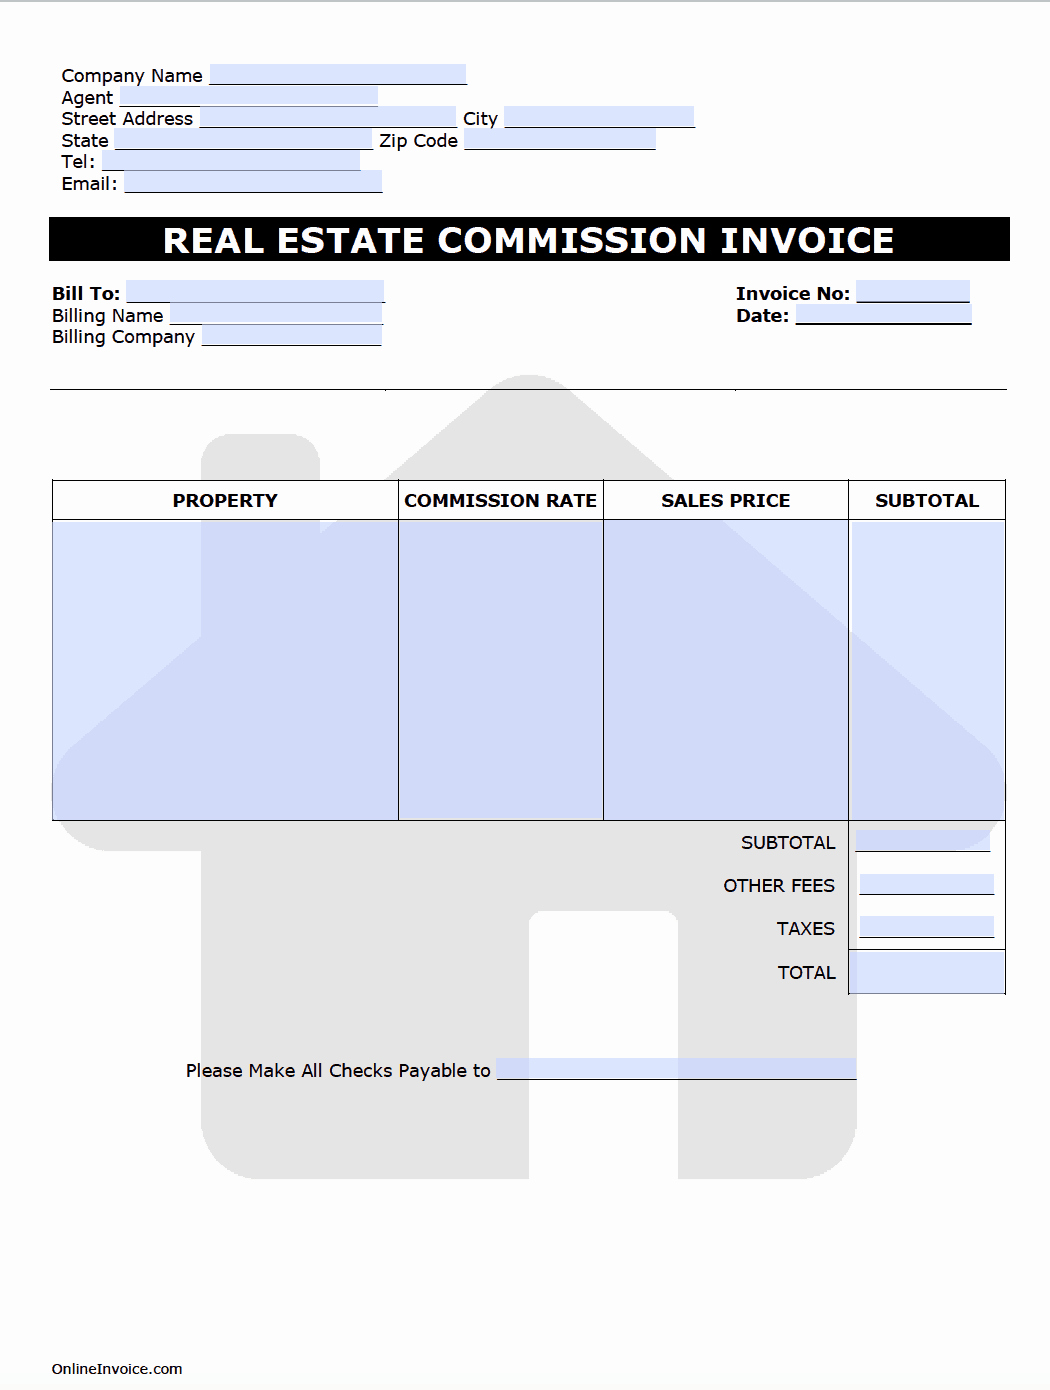 Real Estate Commission Invoice Template New Real Estate Mission Invoice Template Lineinvoice